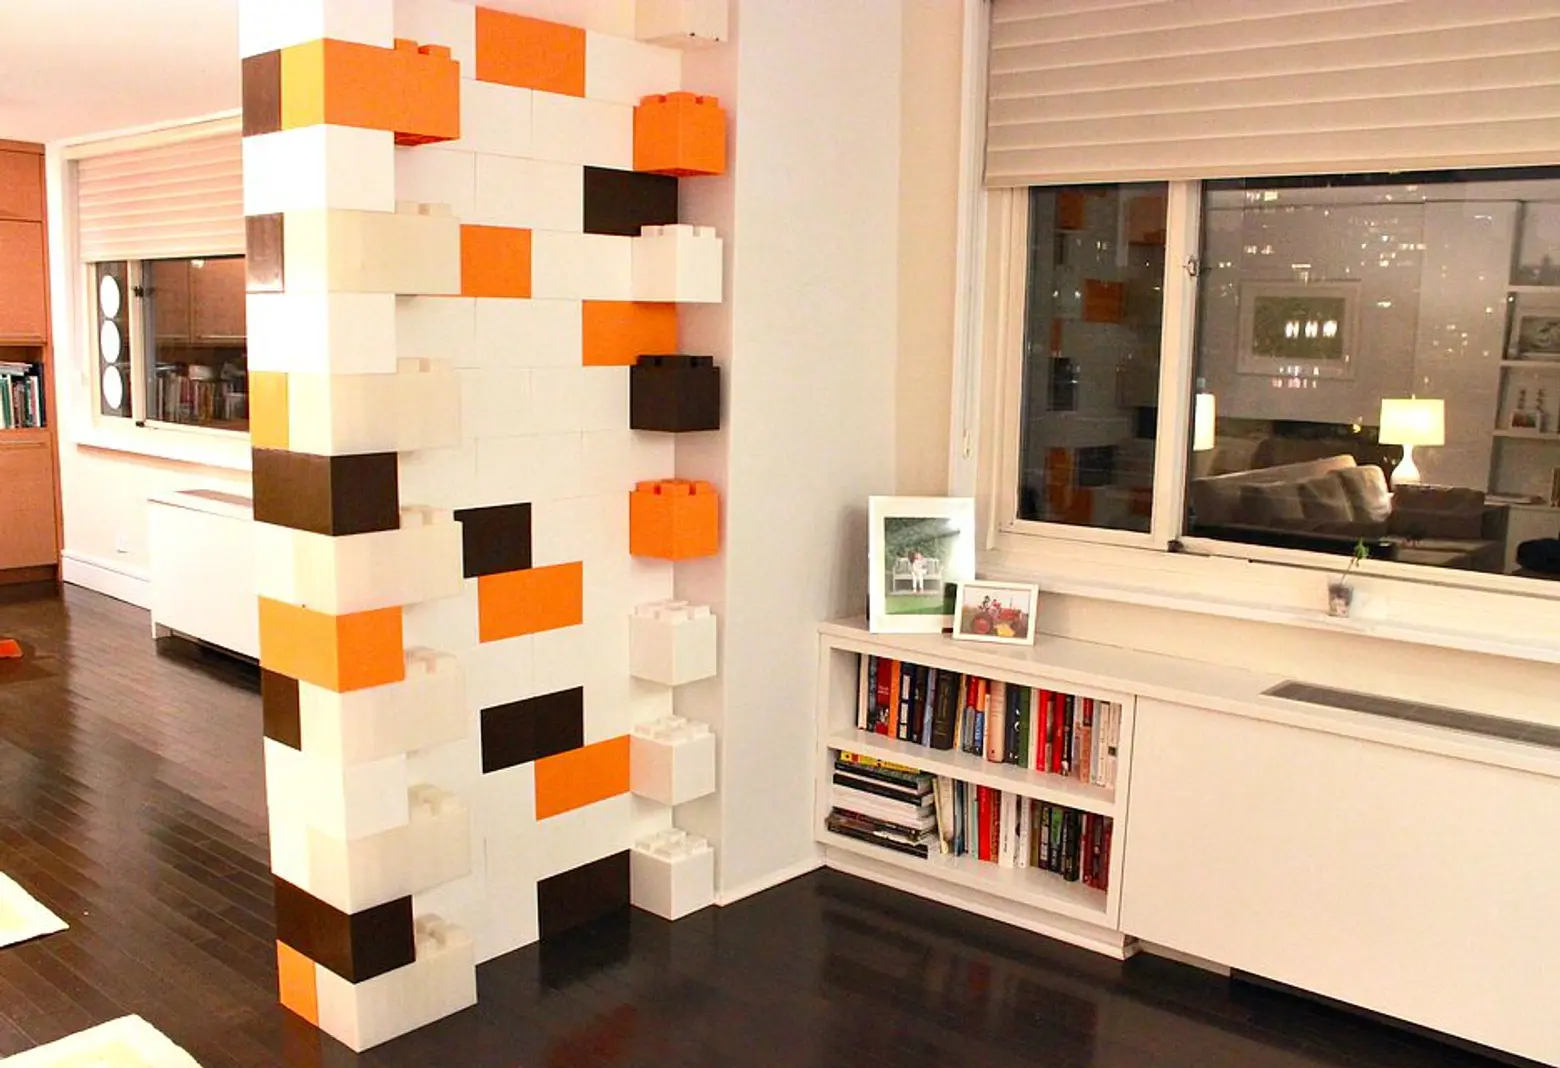 LEGO turns its iconic bricks into wooden home furniture